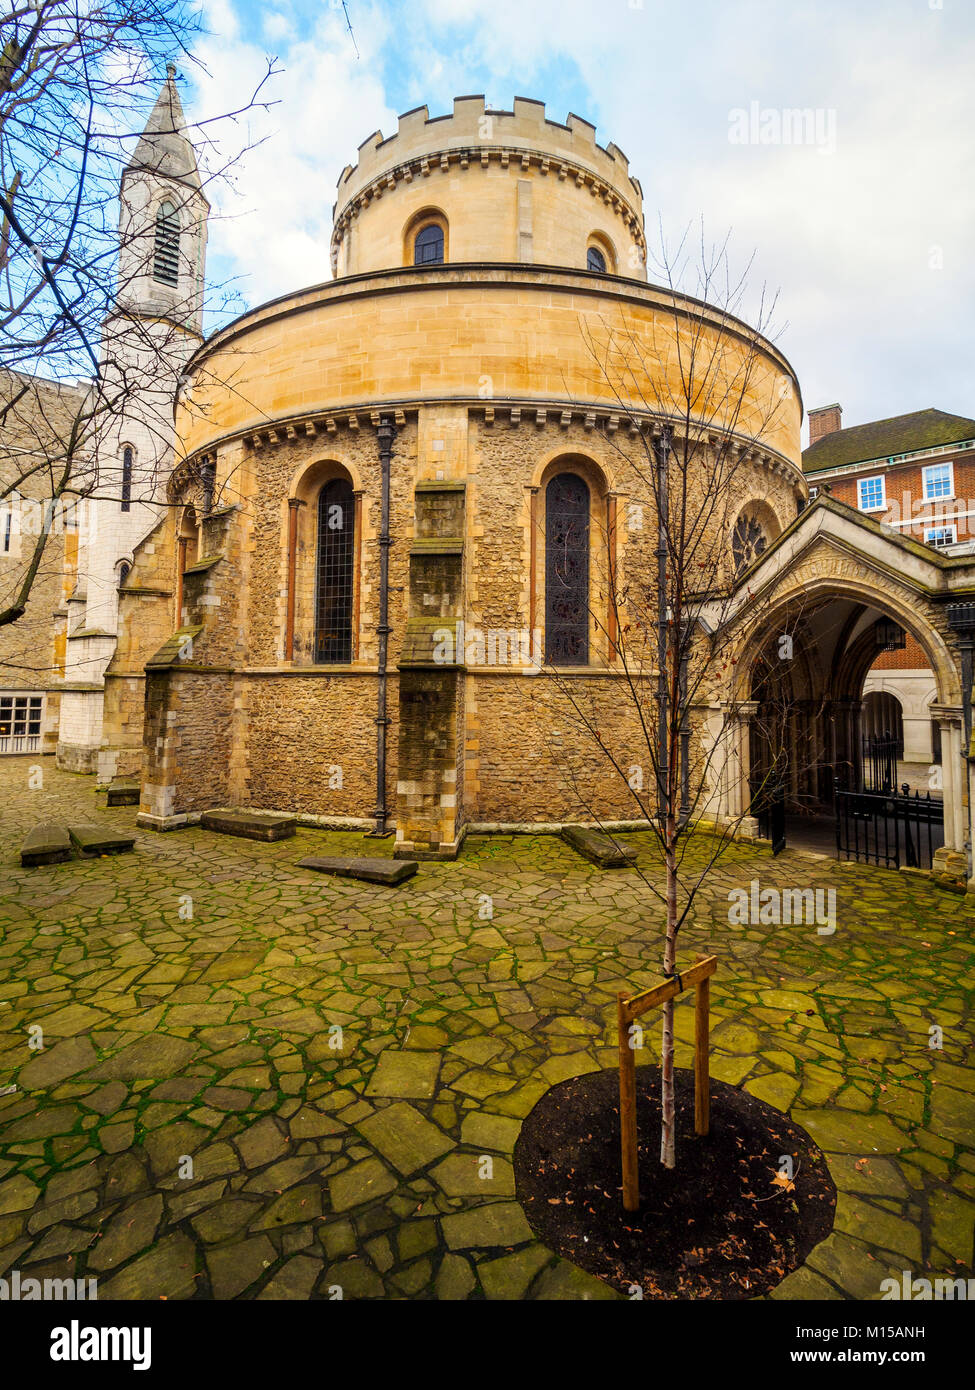 Temple Church, late 12th-century church in the City of London located between Fleet Street and the River Thames, built by the Knights Templar as their English headquarters - London, England Stock Photo